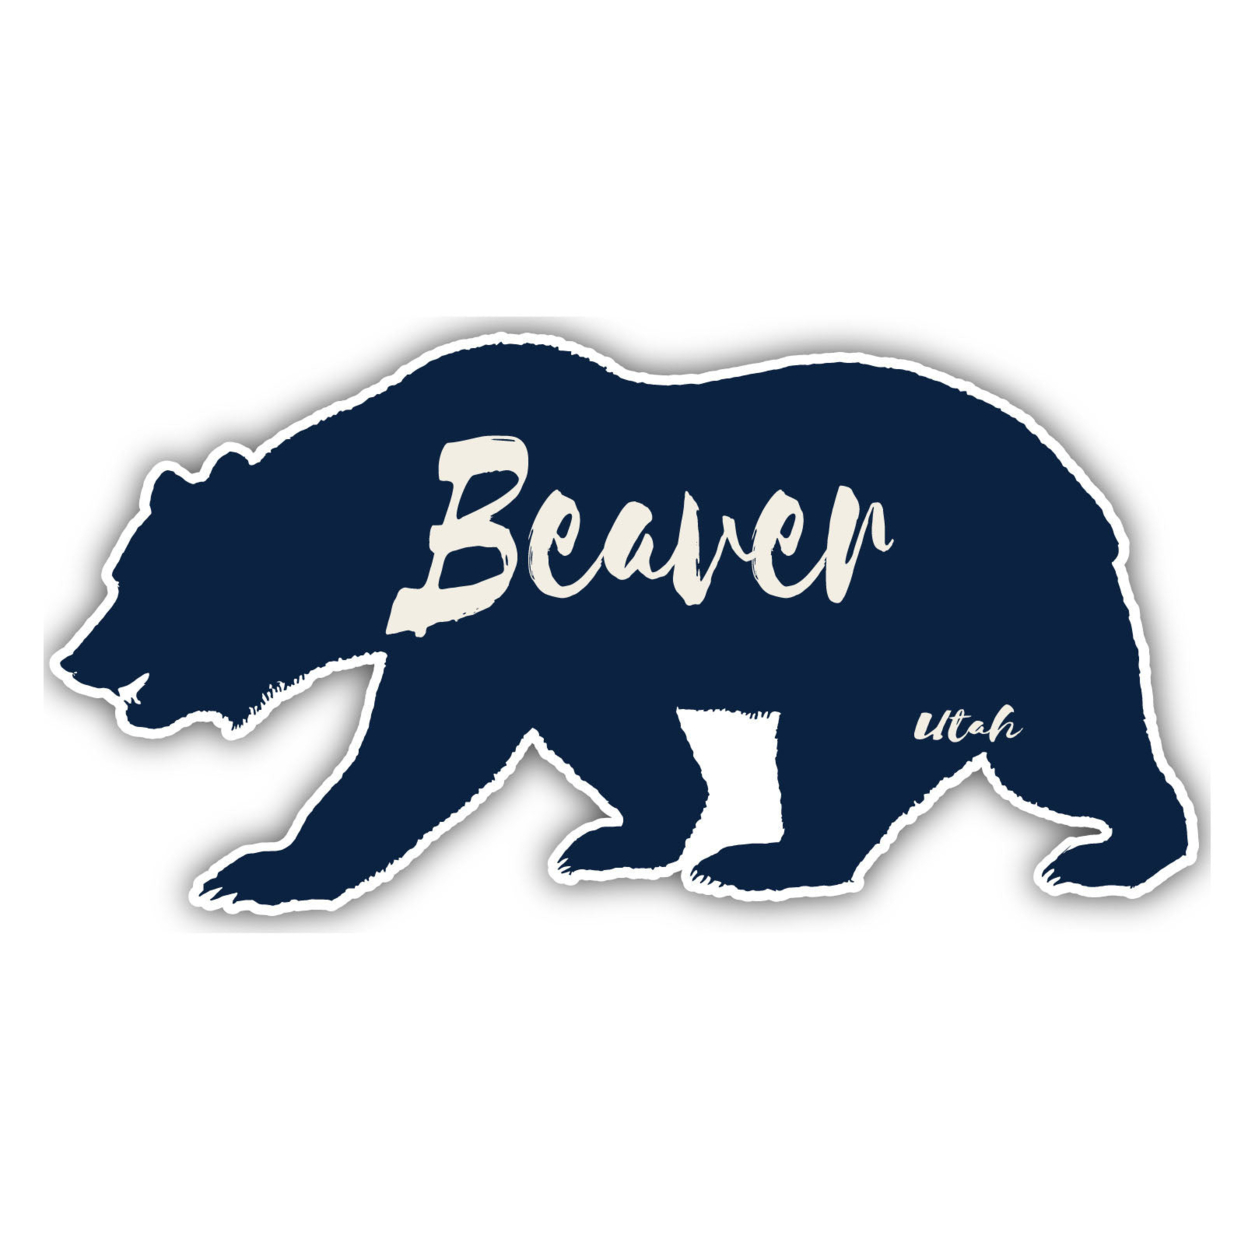 Beaver Utah Souvenir Decorative Stickers (Choose Theme And Size) - 4-Pack, 12-Inch, Adventures Awaits